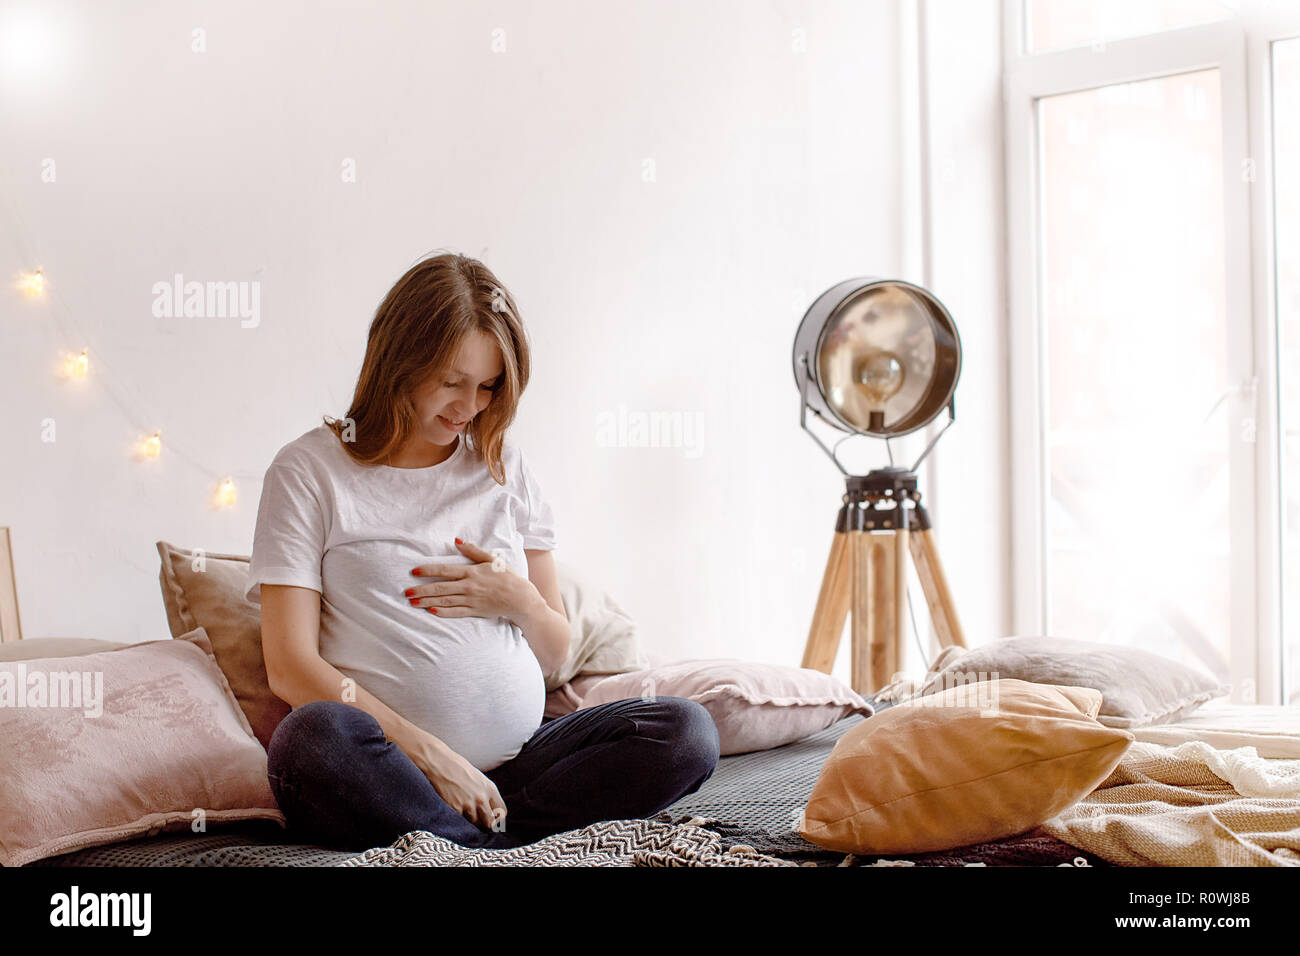 Pregnant woman sitting on bed Banque D'Images